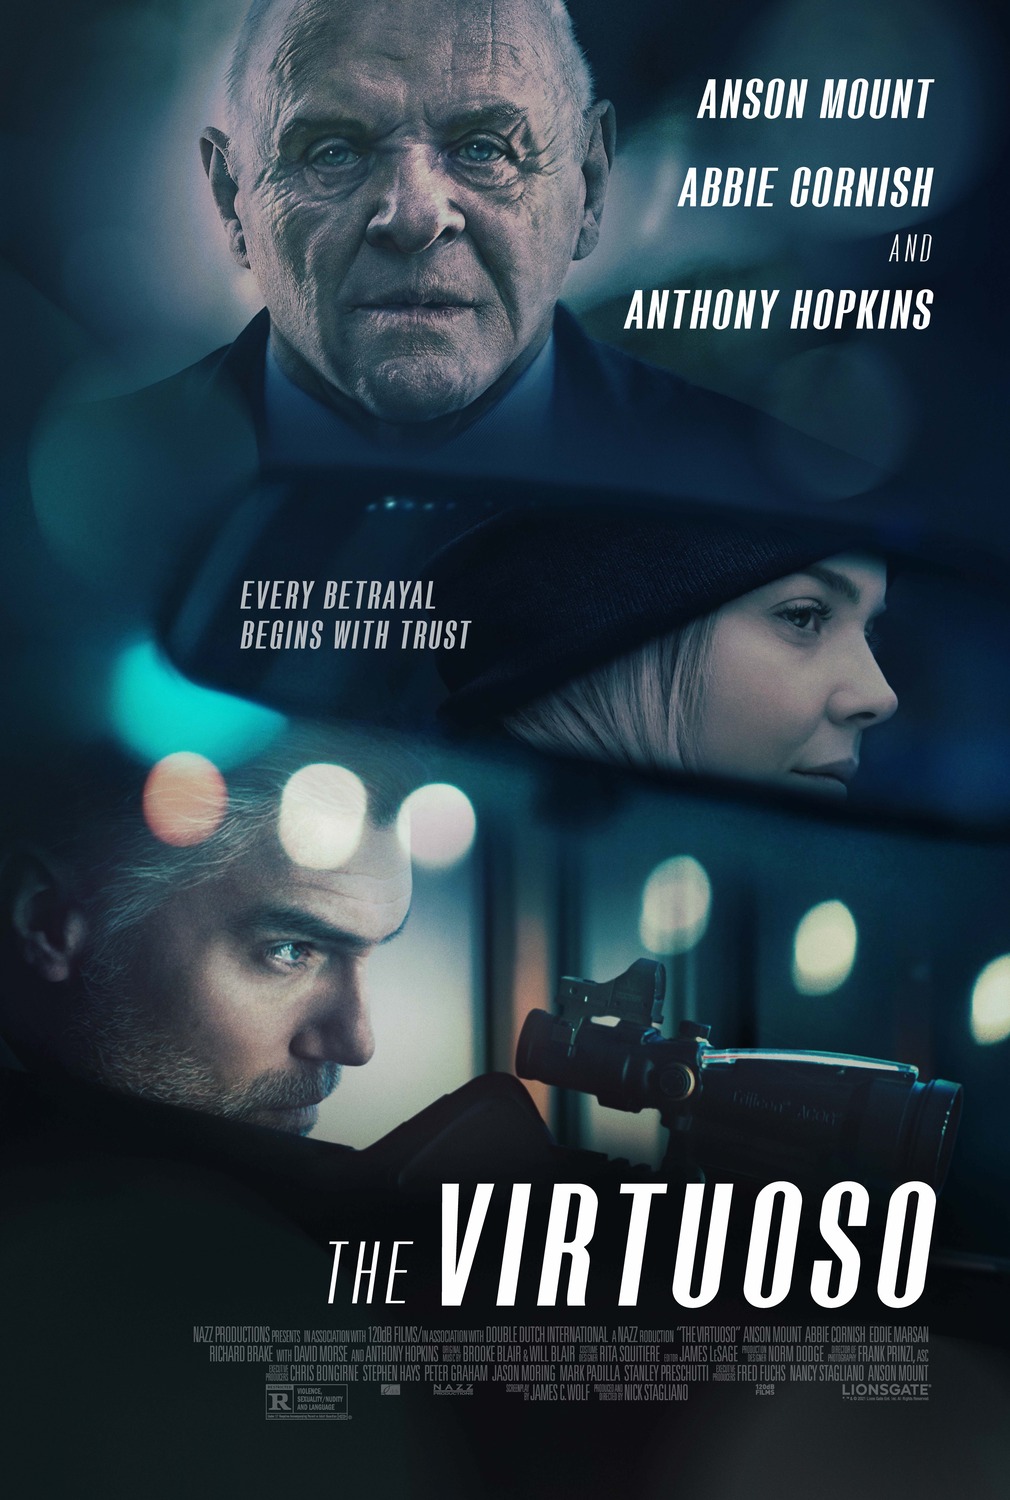 Extra Large Movie Poster Image for The Virtuoso 